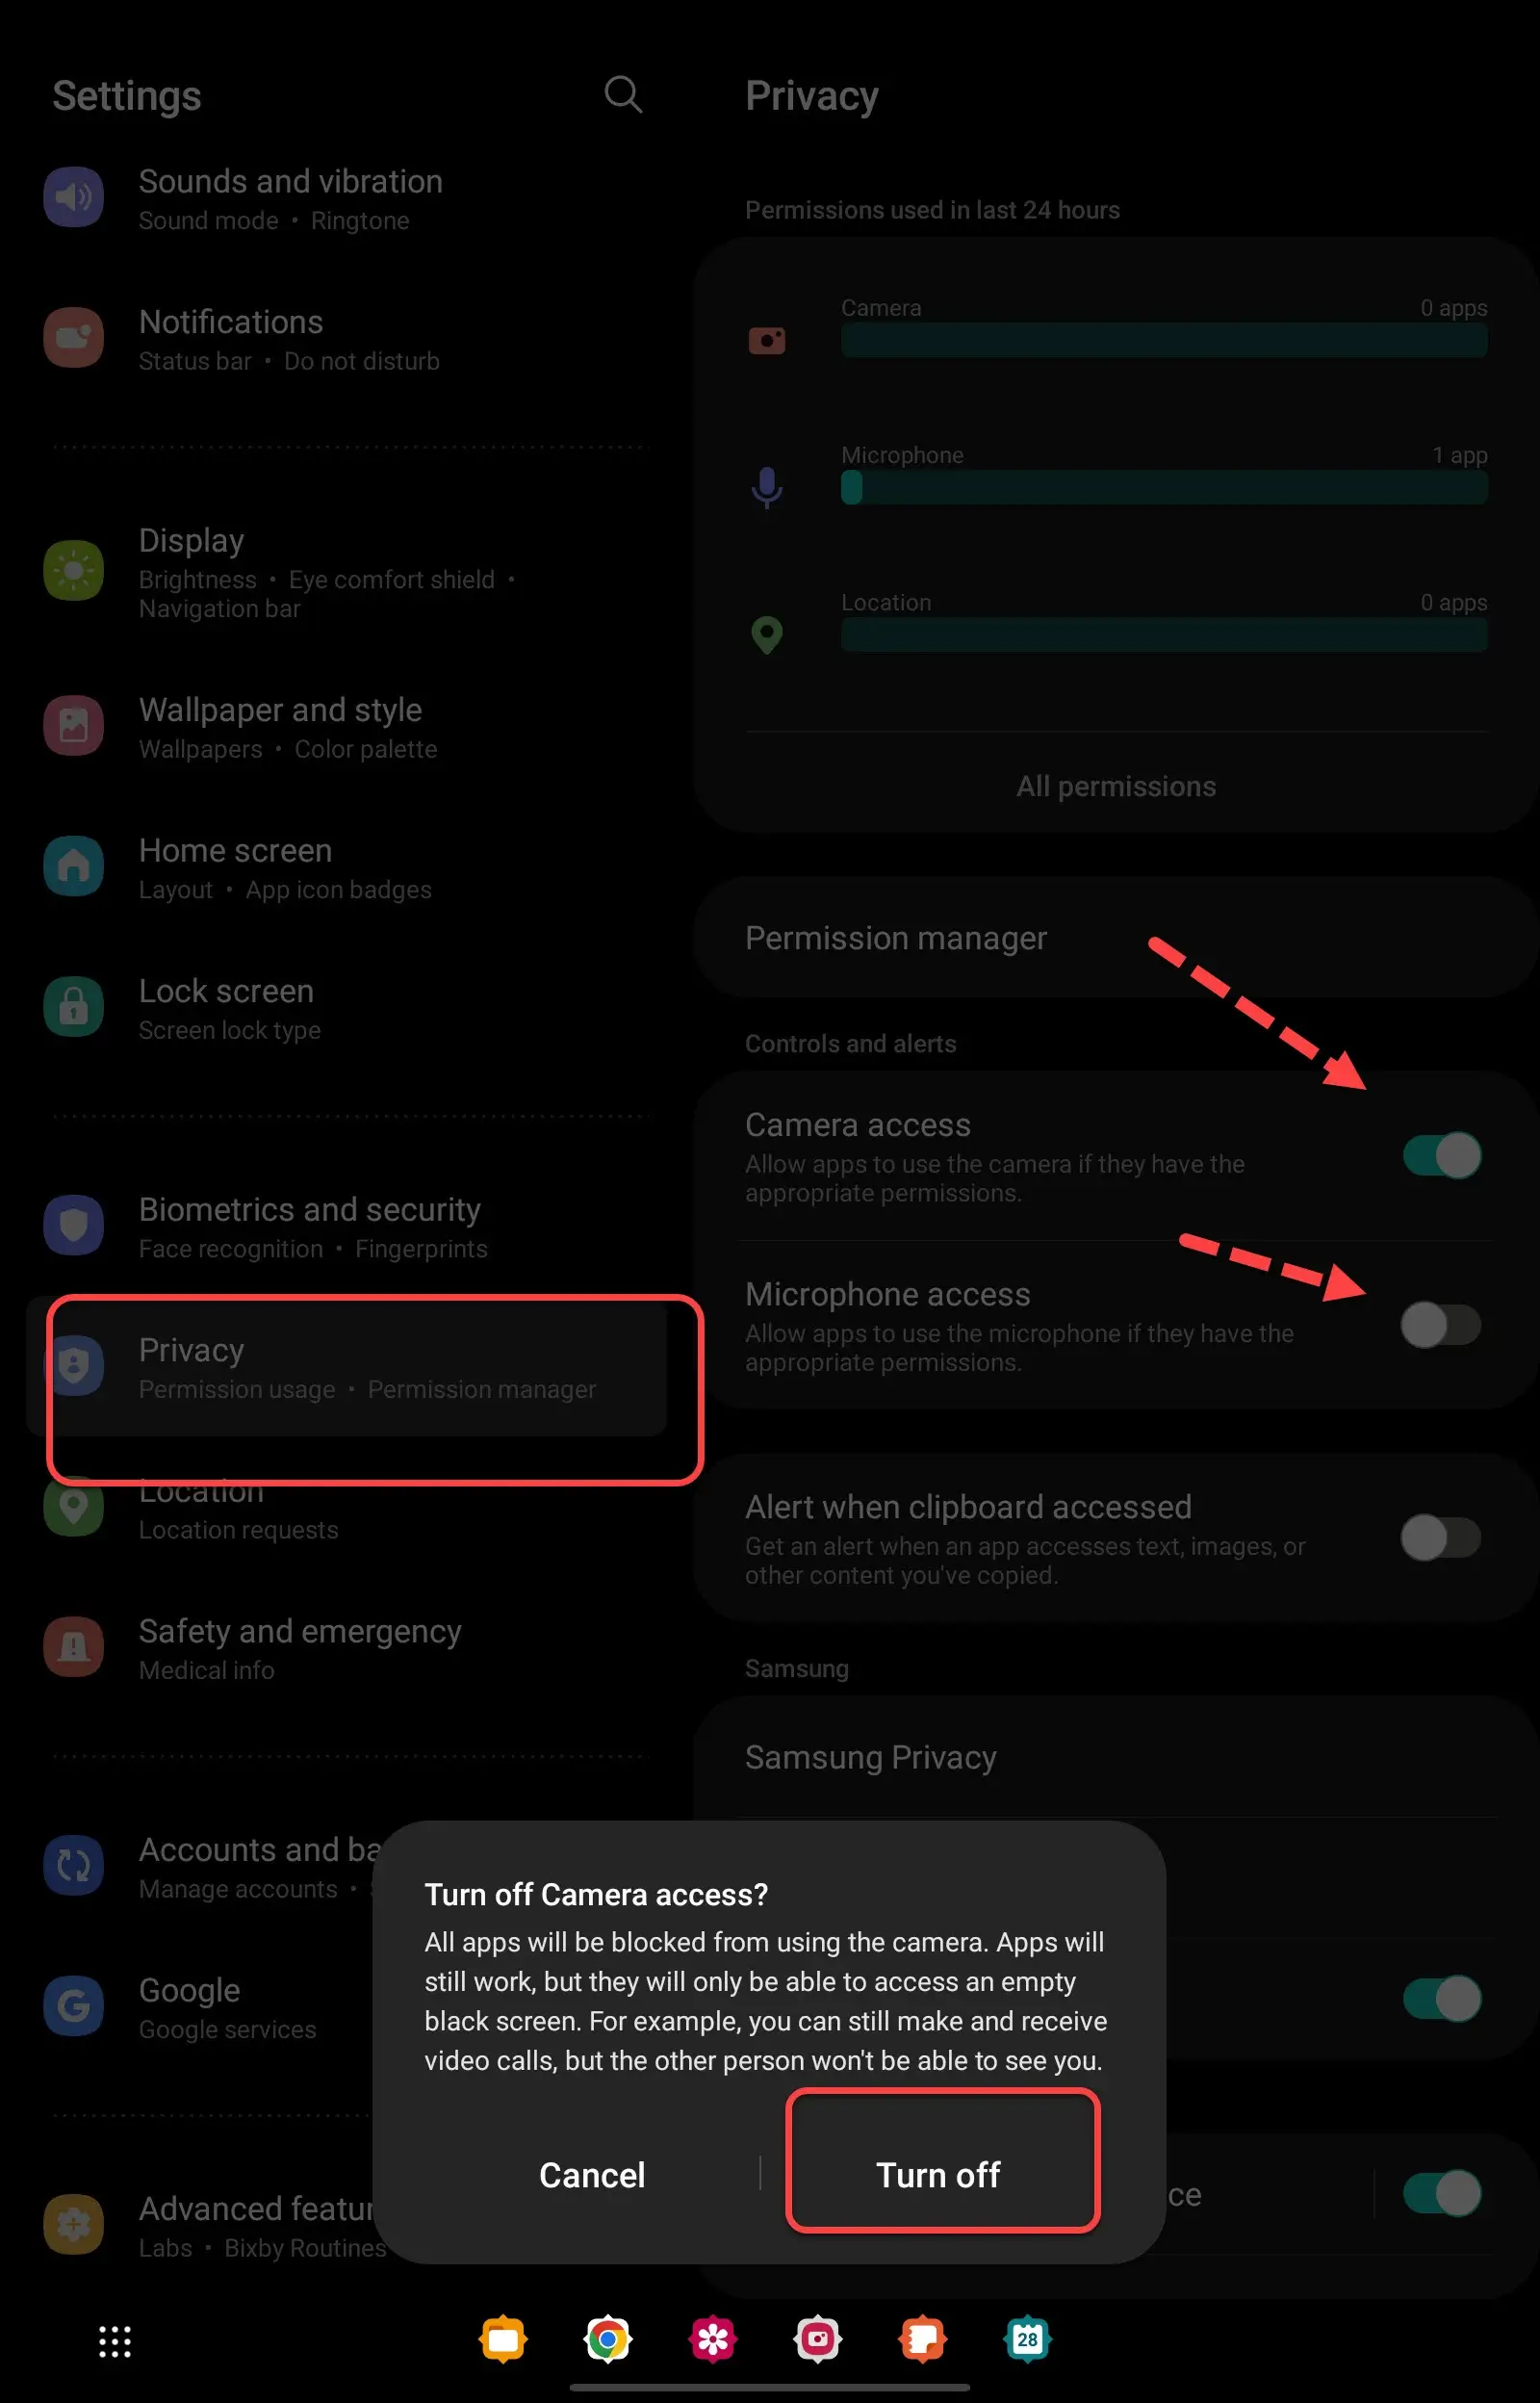 How to Get Rid of Access to Camera and Microphone on Samsung